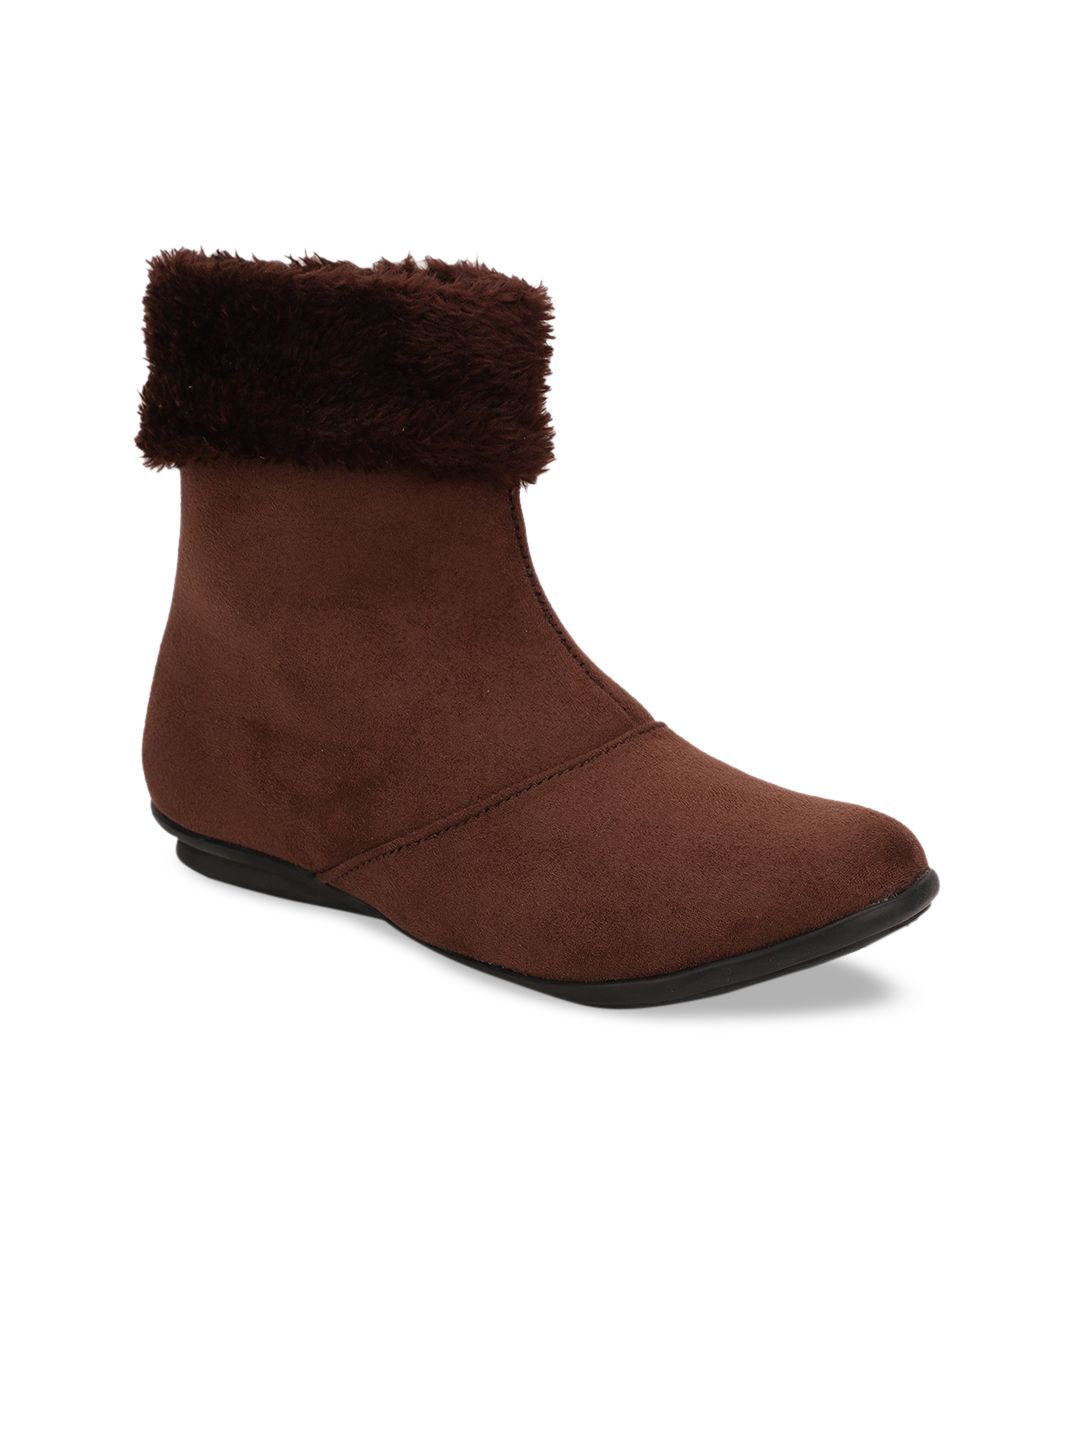 Bruno Manetti Women Brown Suede Flat Boots Price in India